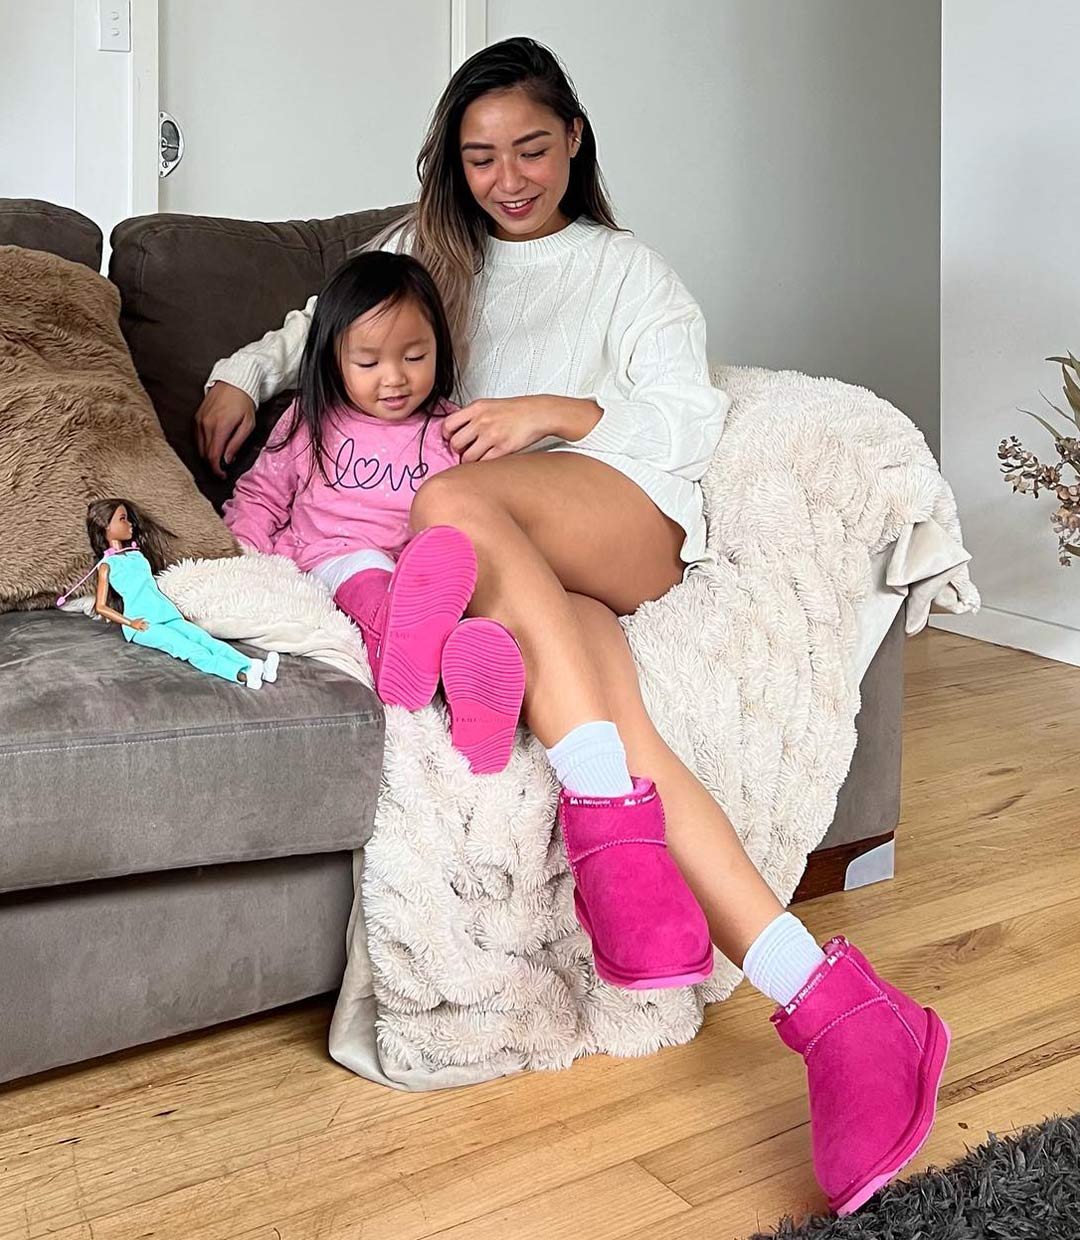 Mum and daughter sitting on couch wearing matching bright pink sheepskin boots